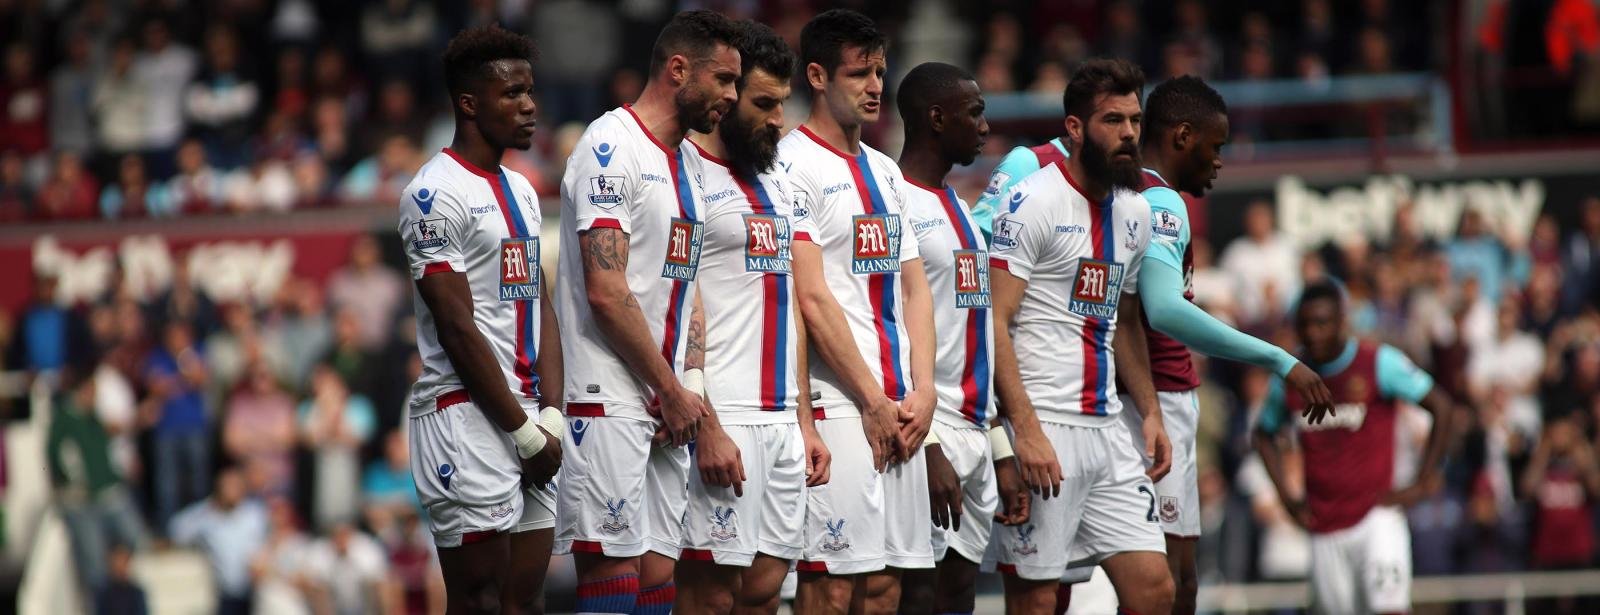 Crystal Palace face their biggest match of the season when they host Norwich